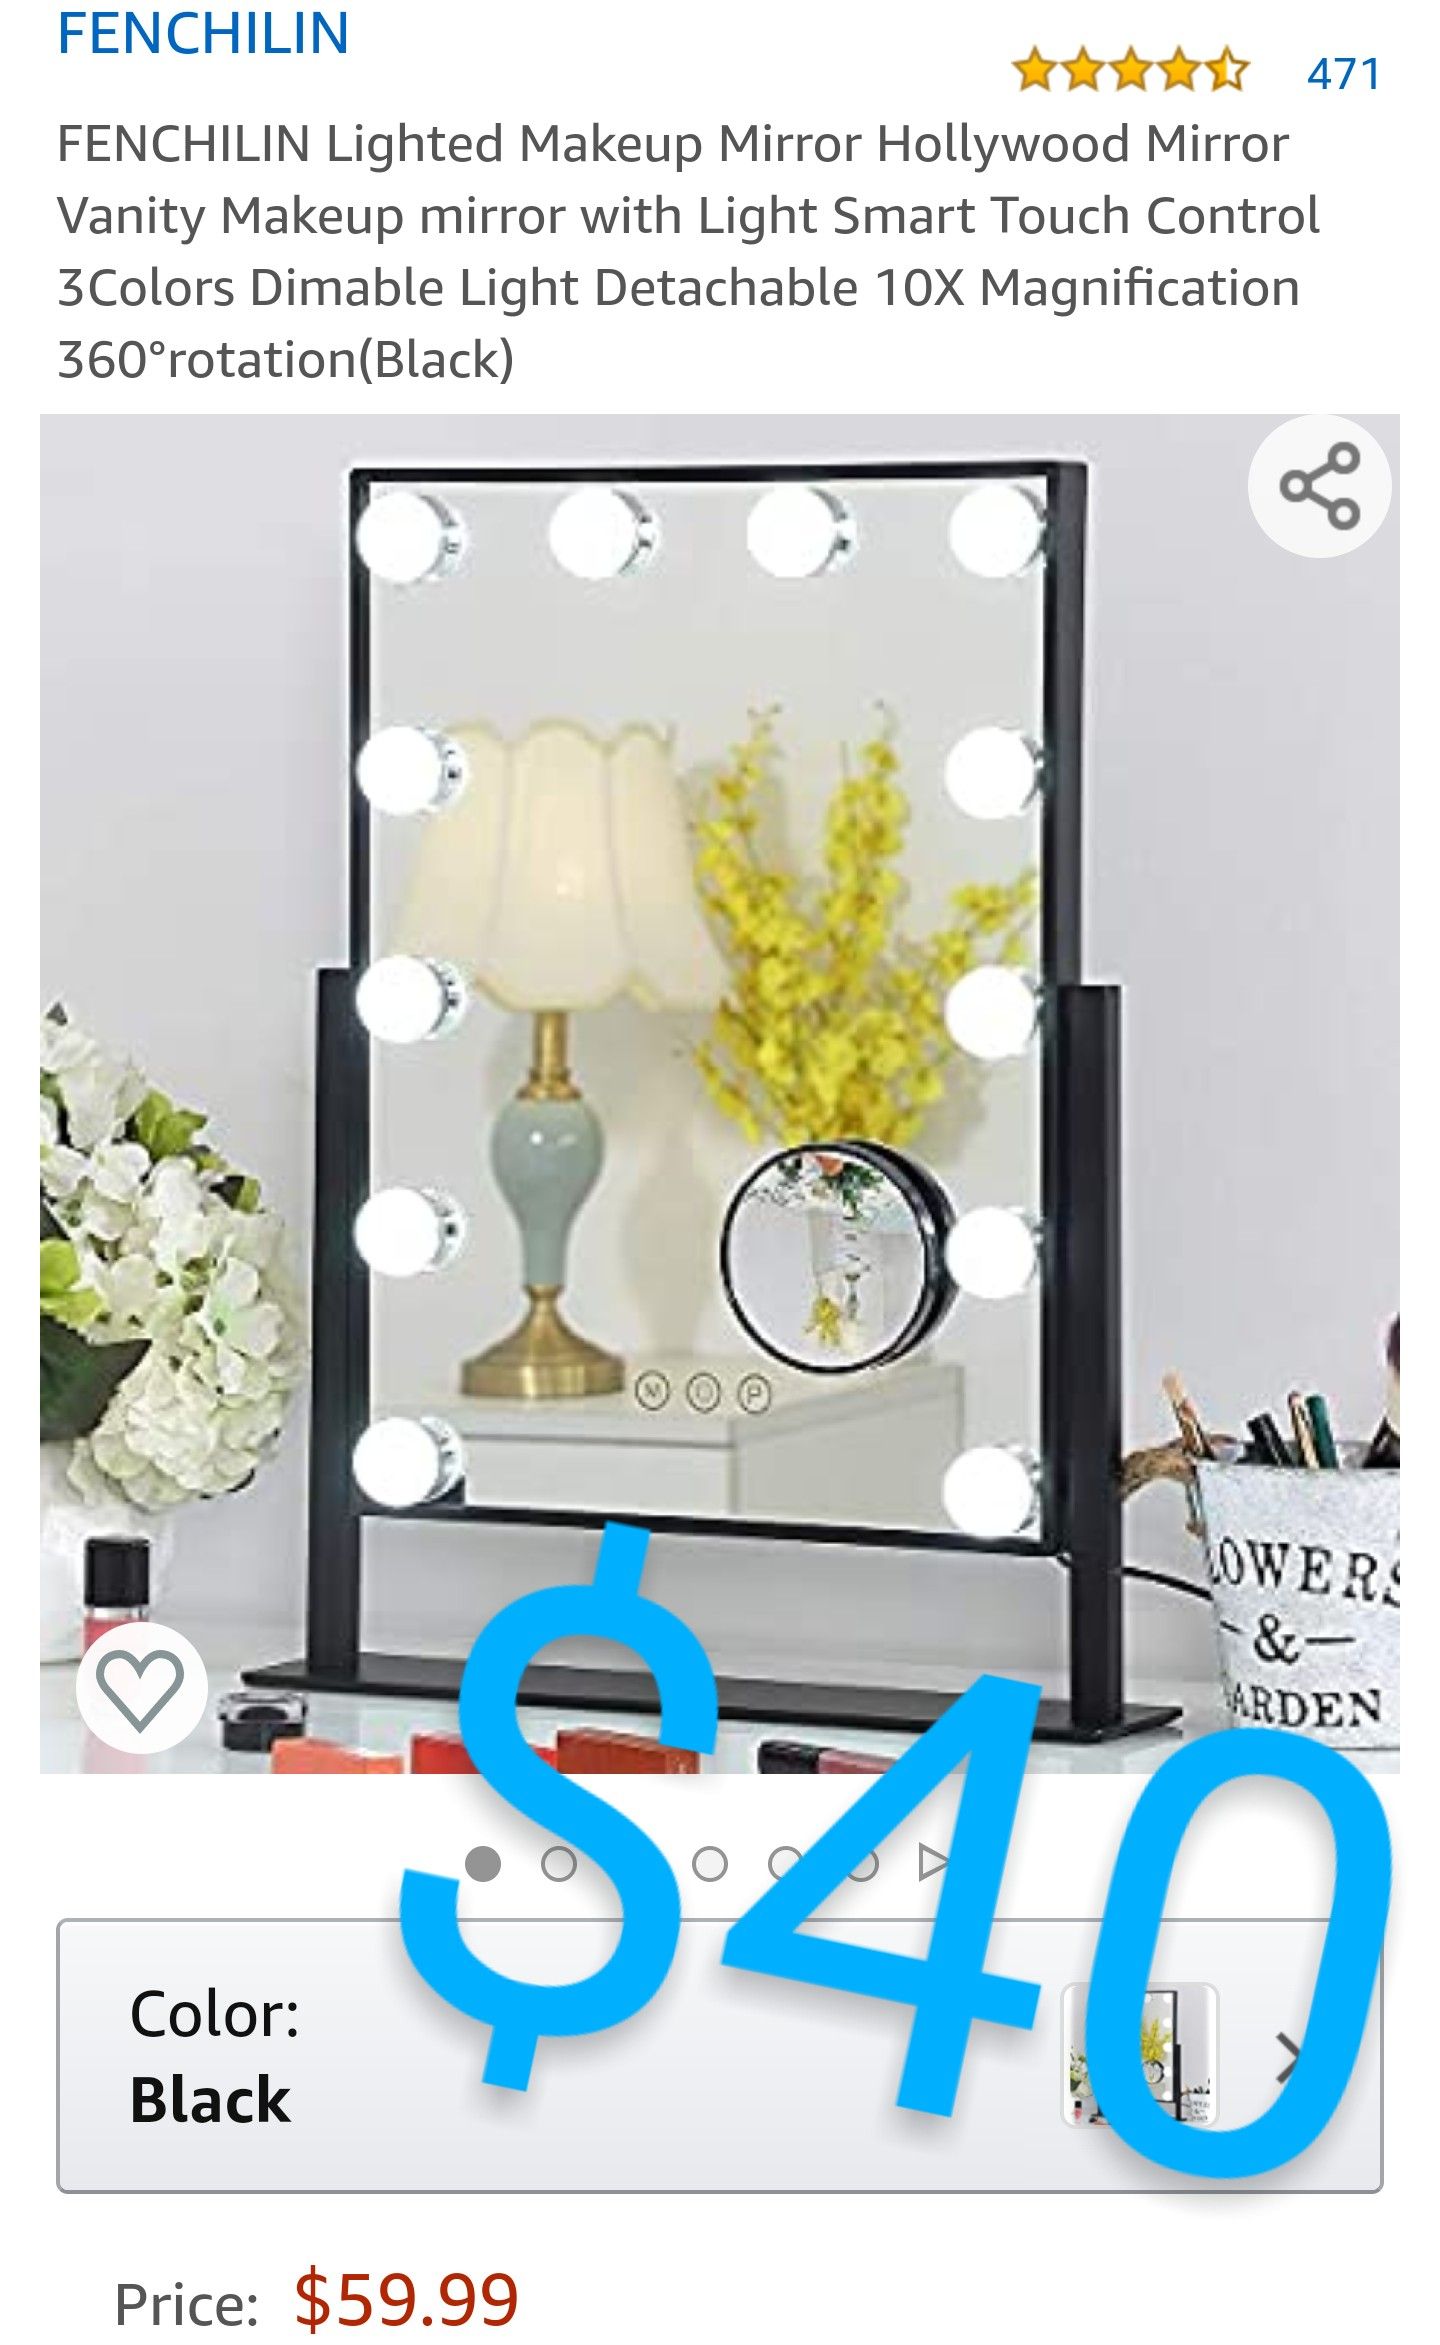 FENCHILIN 4.6 out of 5 stars  471Reviews FENCHILIN Lighted Makeup Mirror Hollywood Mirror Vanity Makeup mirror with Light Smart Touch Control